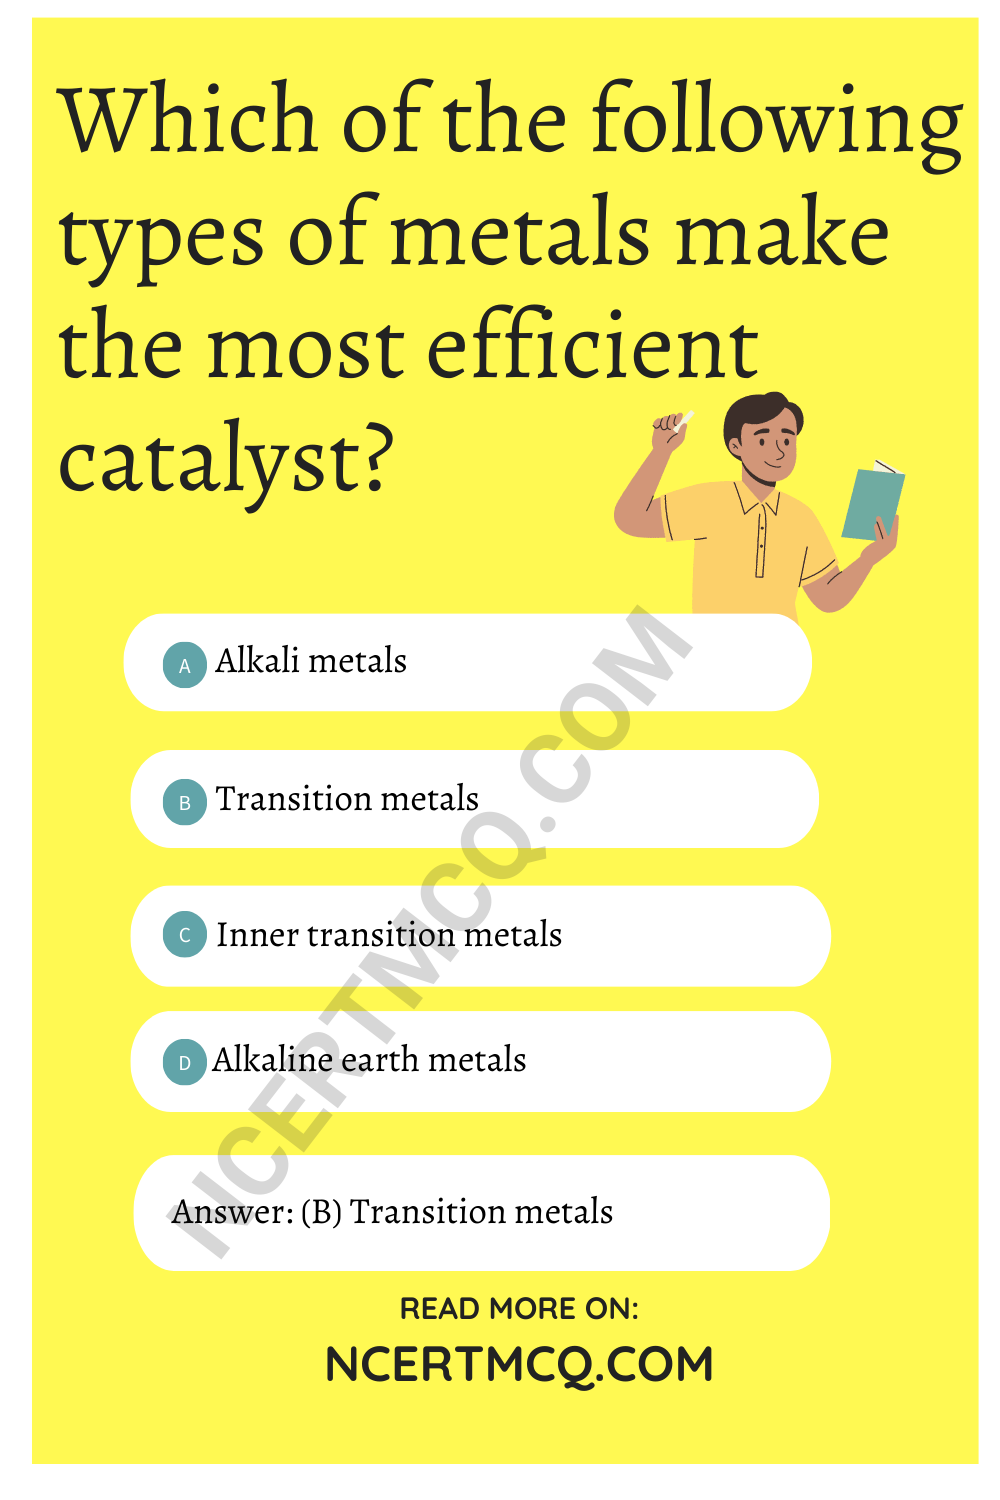 Which of the following types of metals make the most efficient catalyst?